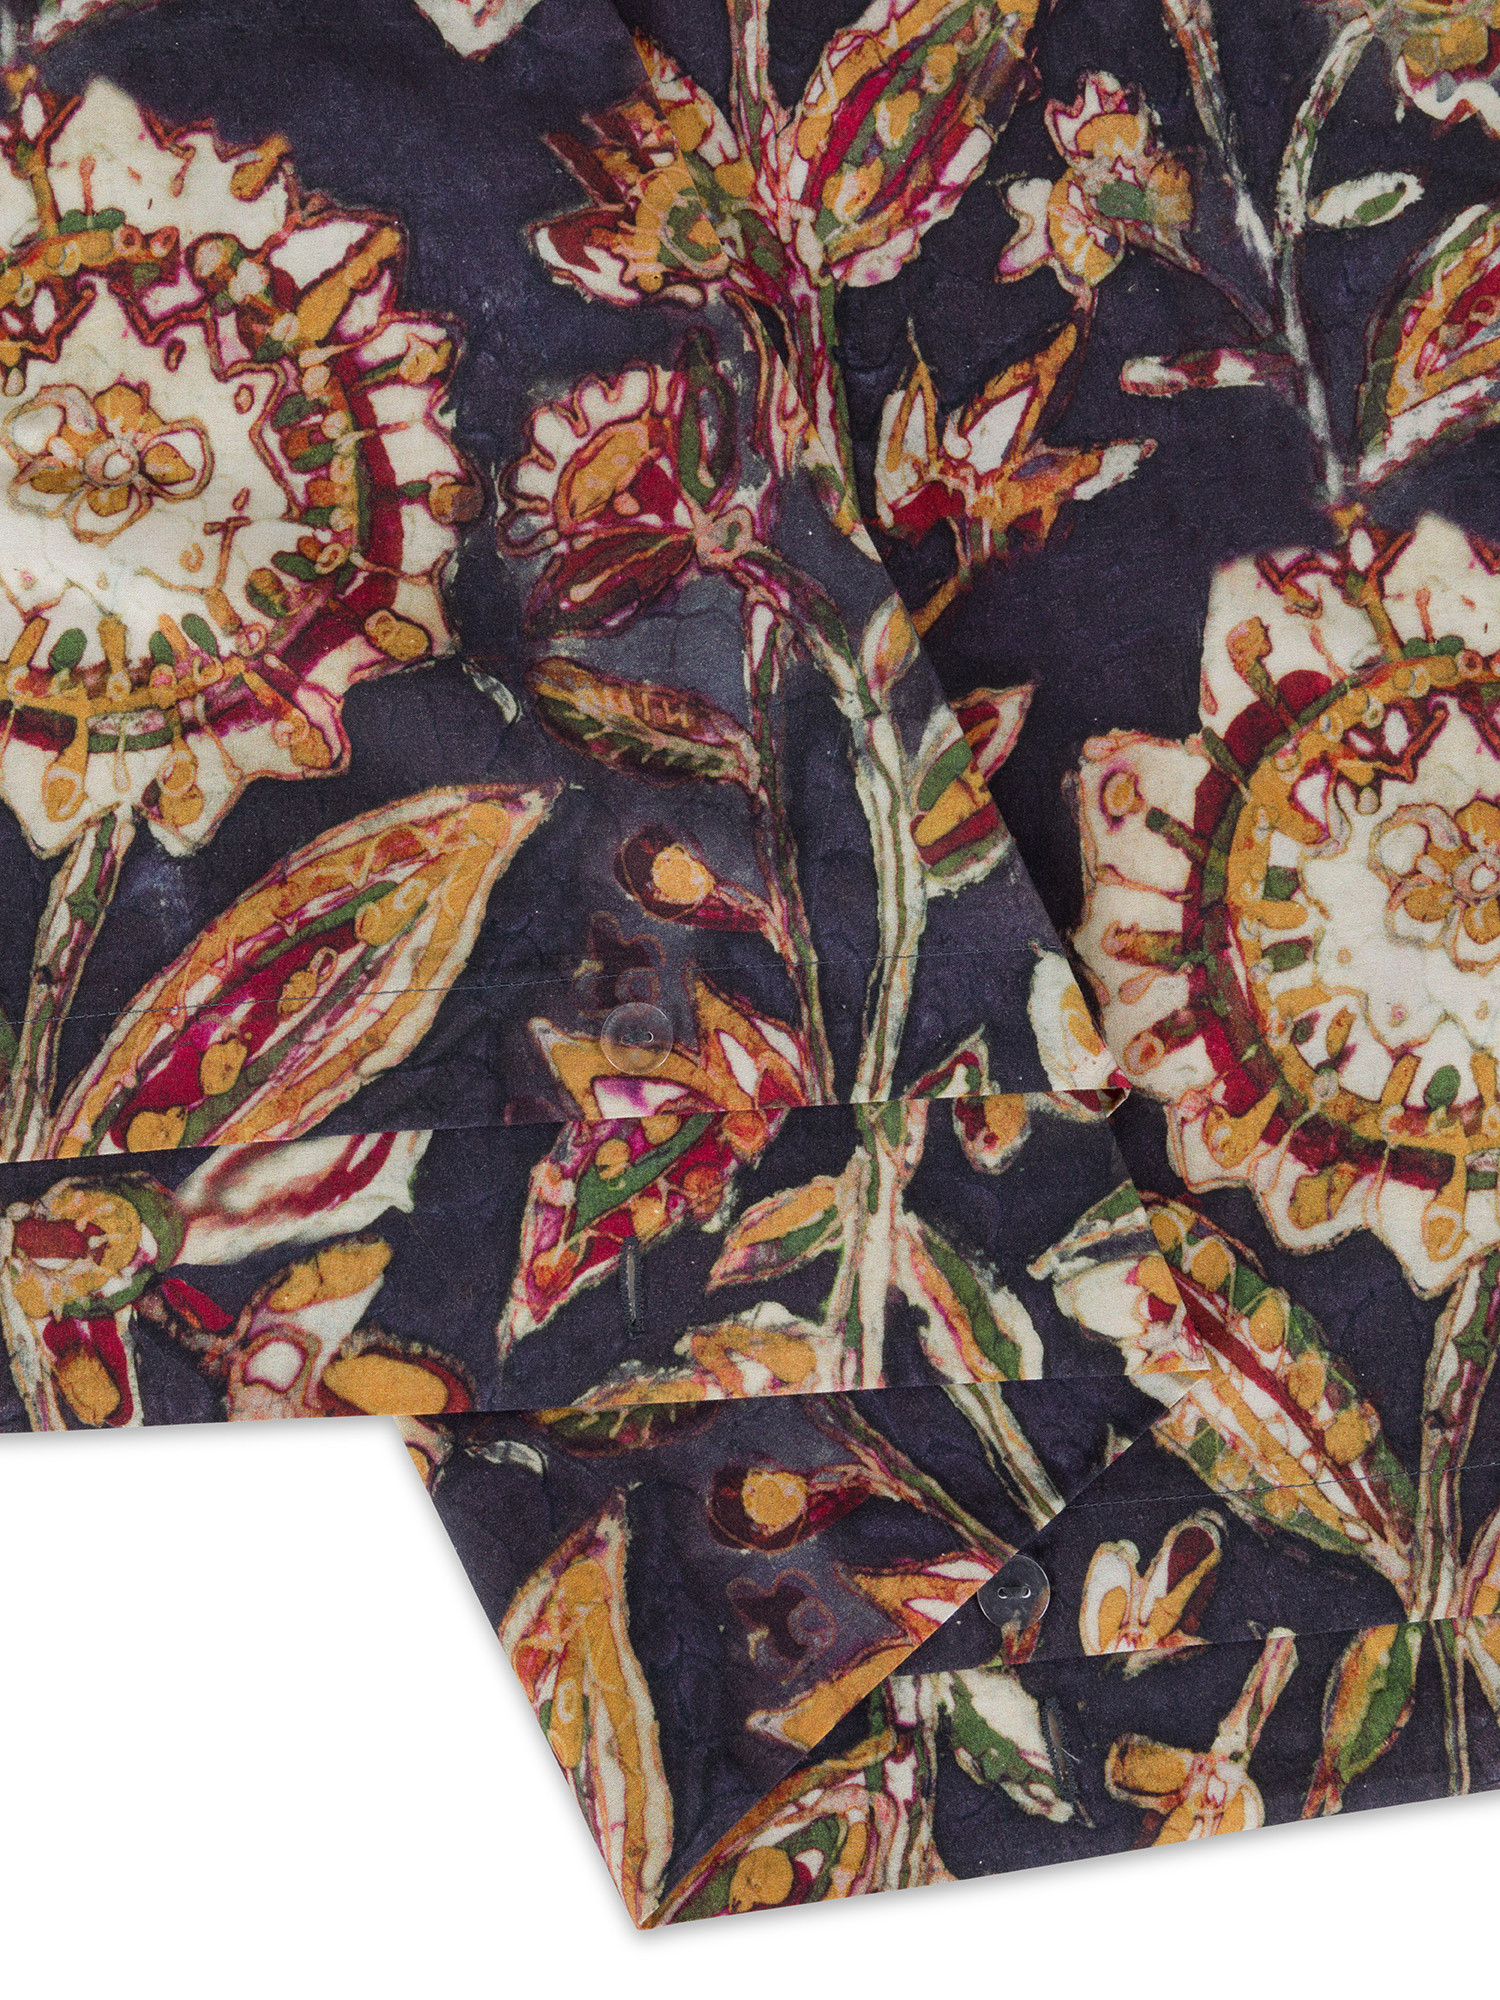 Floral patterned cotton percale duvet cover, Multicolor, large image number 2